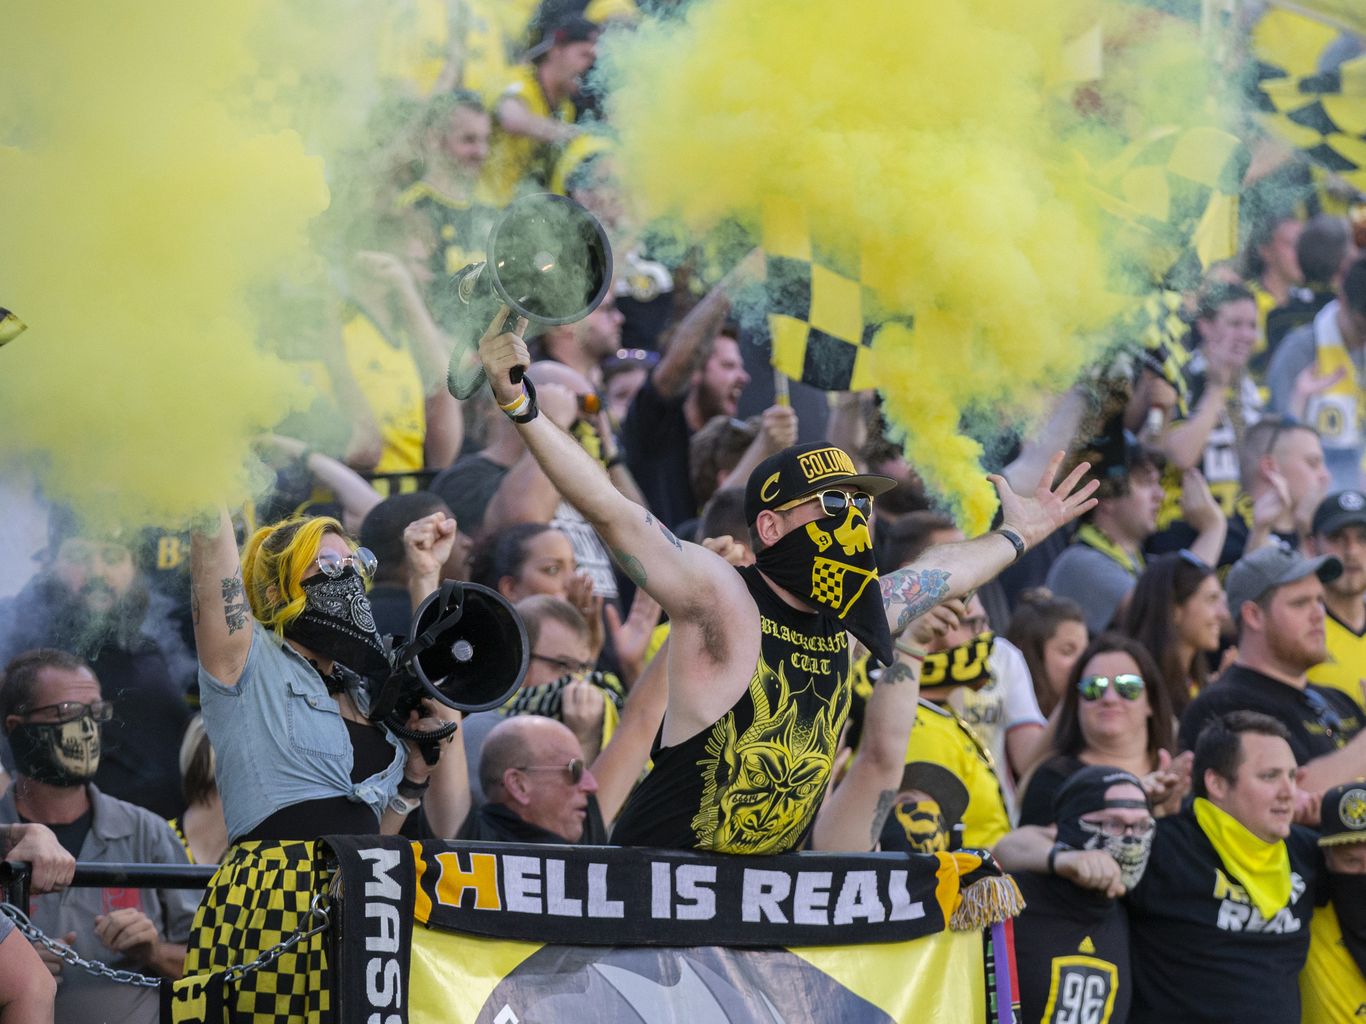 Columbus Crew, FC Cincinnati fans gear up for Hell is Real